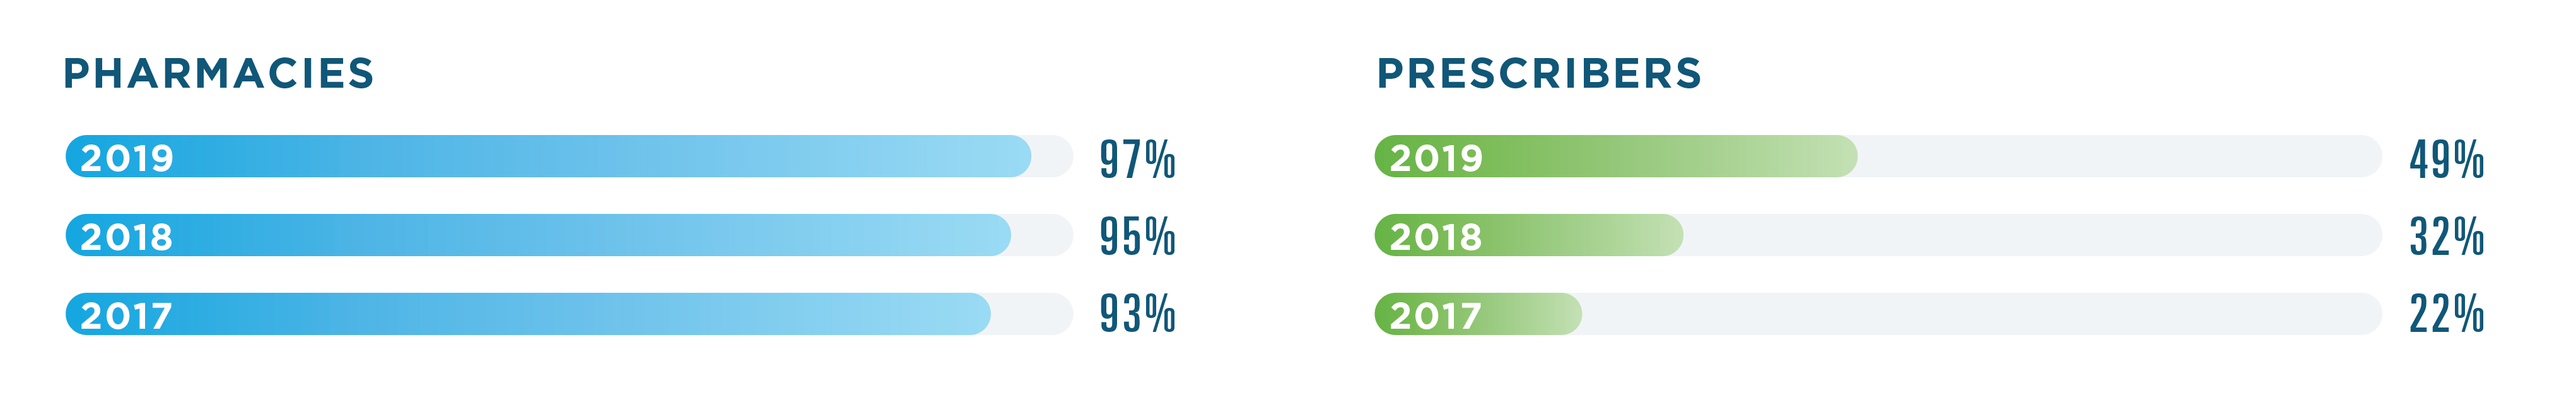 In 2019, 97% of pharmacies were enabled for EPCS, compared to 95% in 2018 and 93% in 2017. 49% of prescribers were enabled in 2019, compared to 32% in 2018 and 22% in 2017.